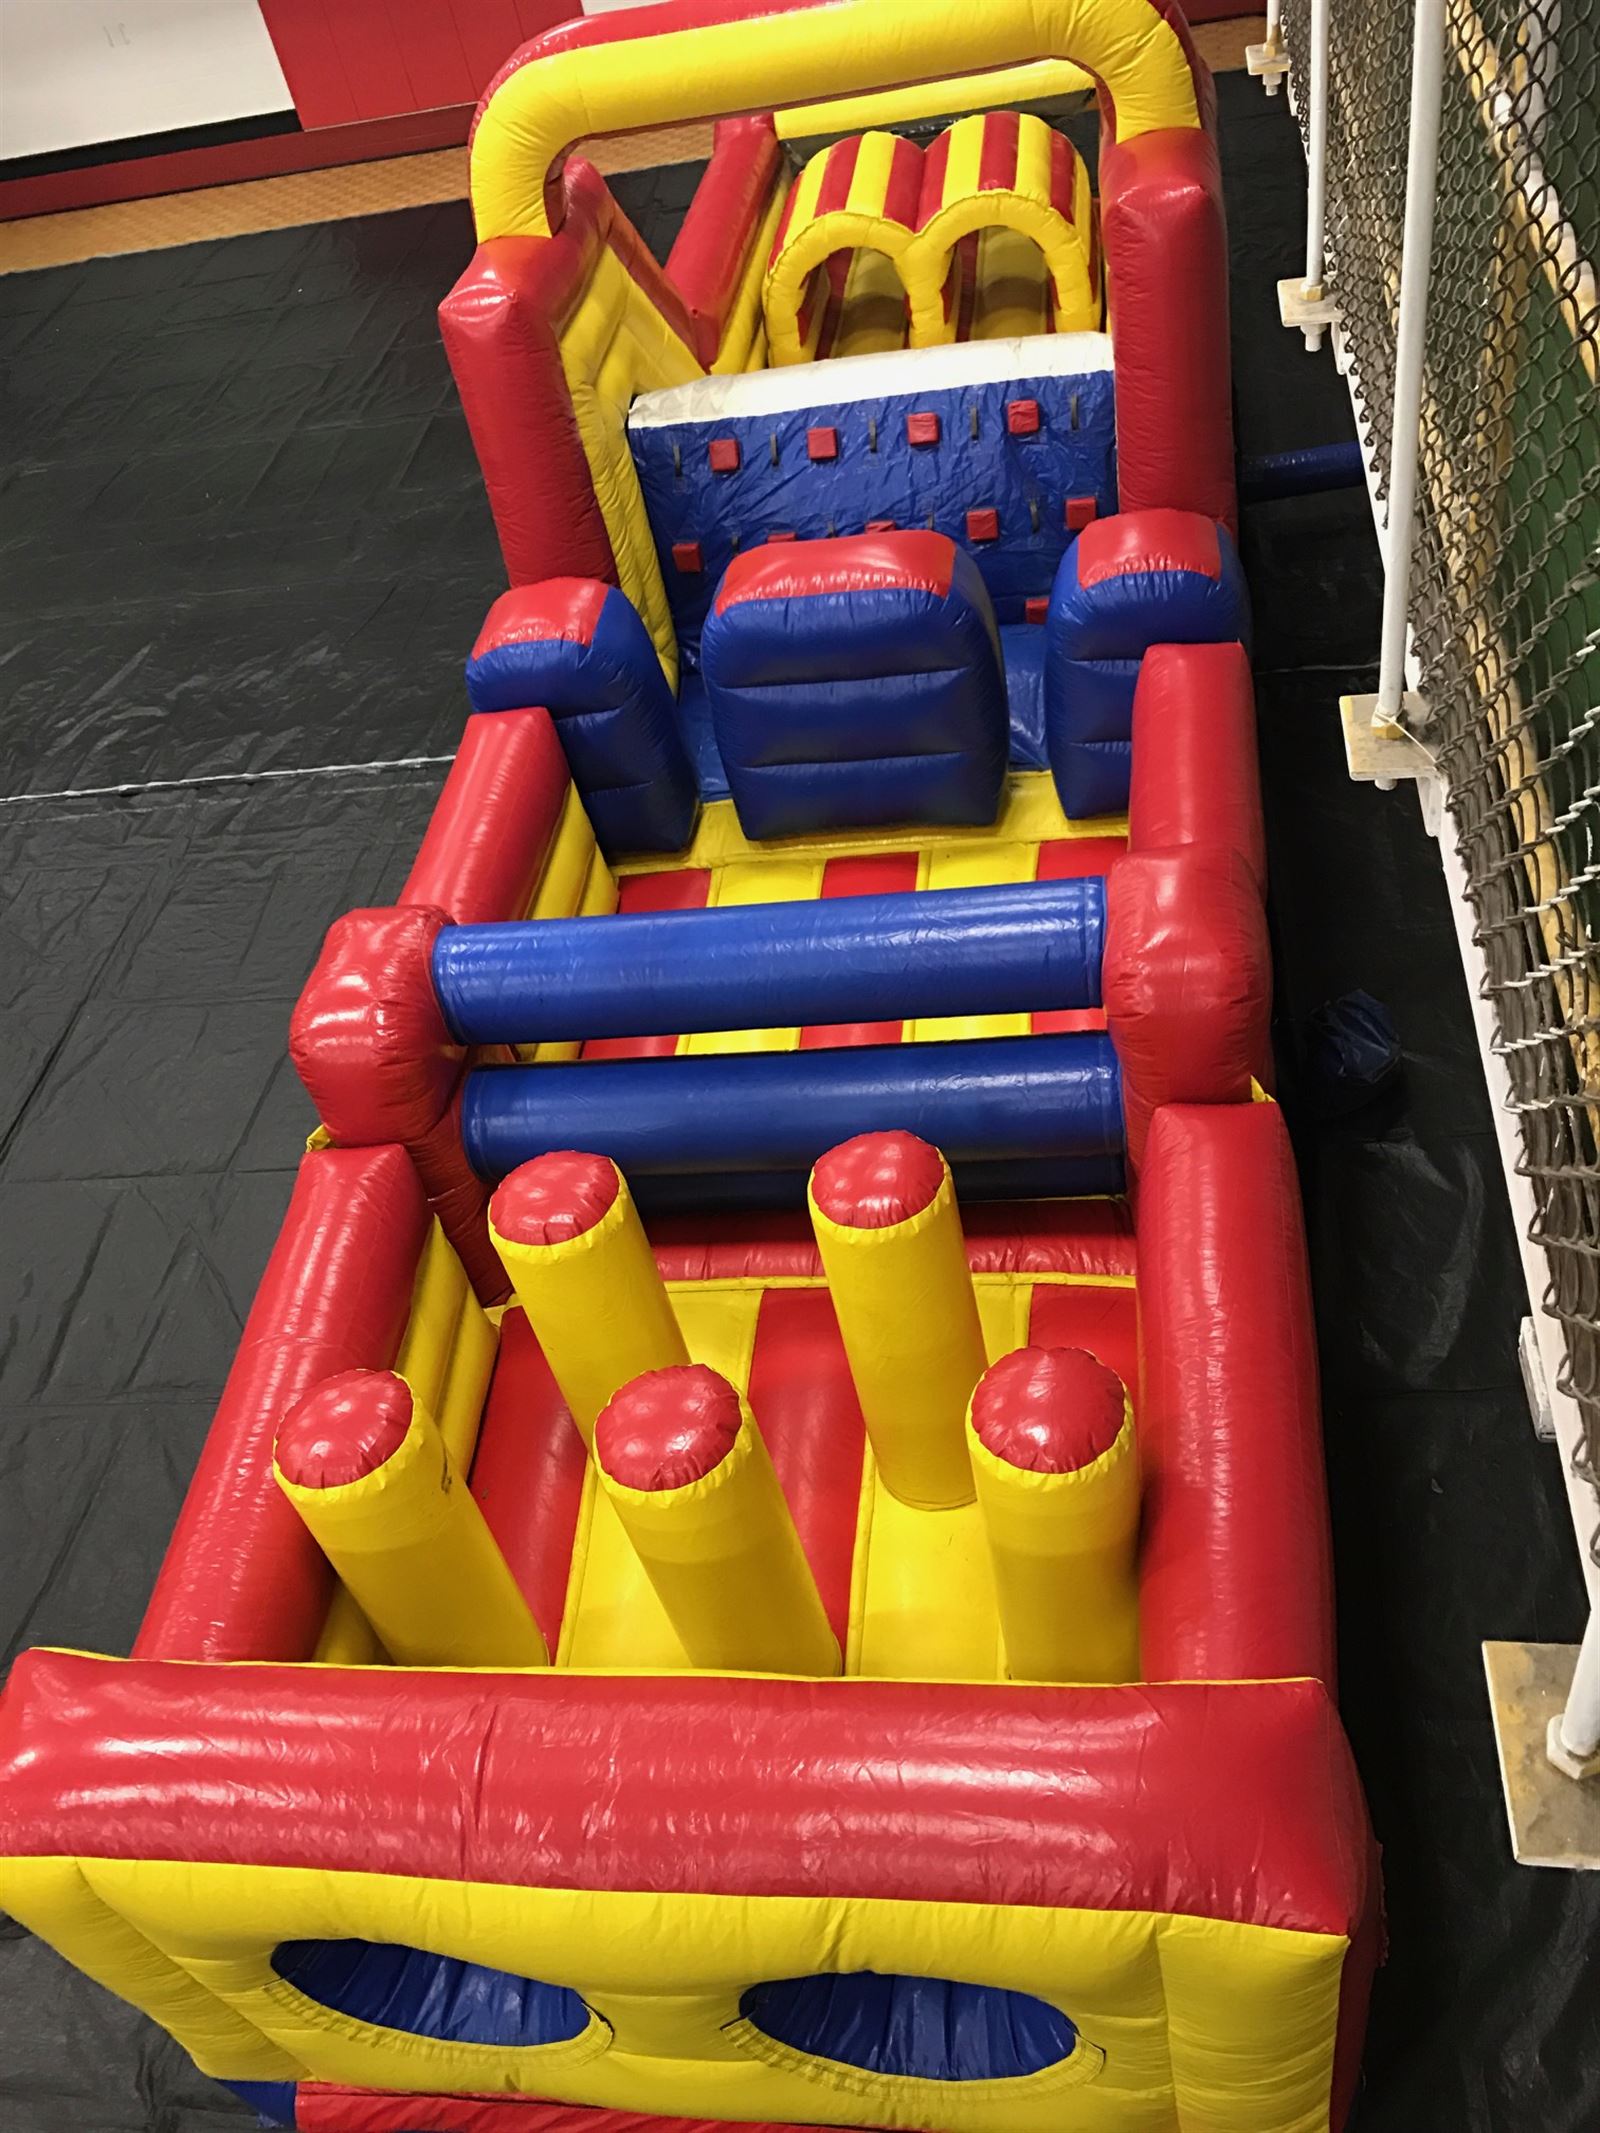 obstacle racer inflatable bouncer